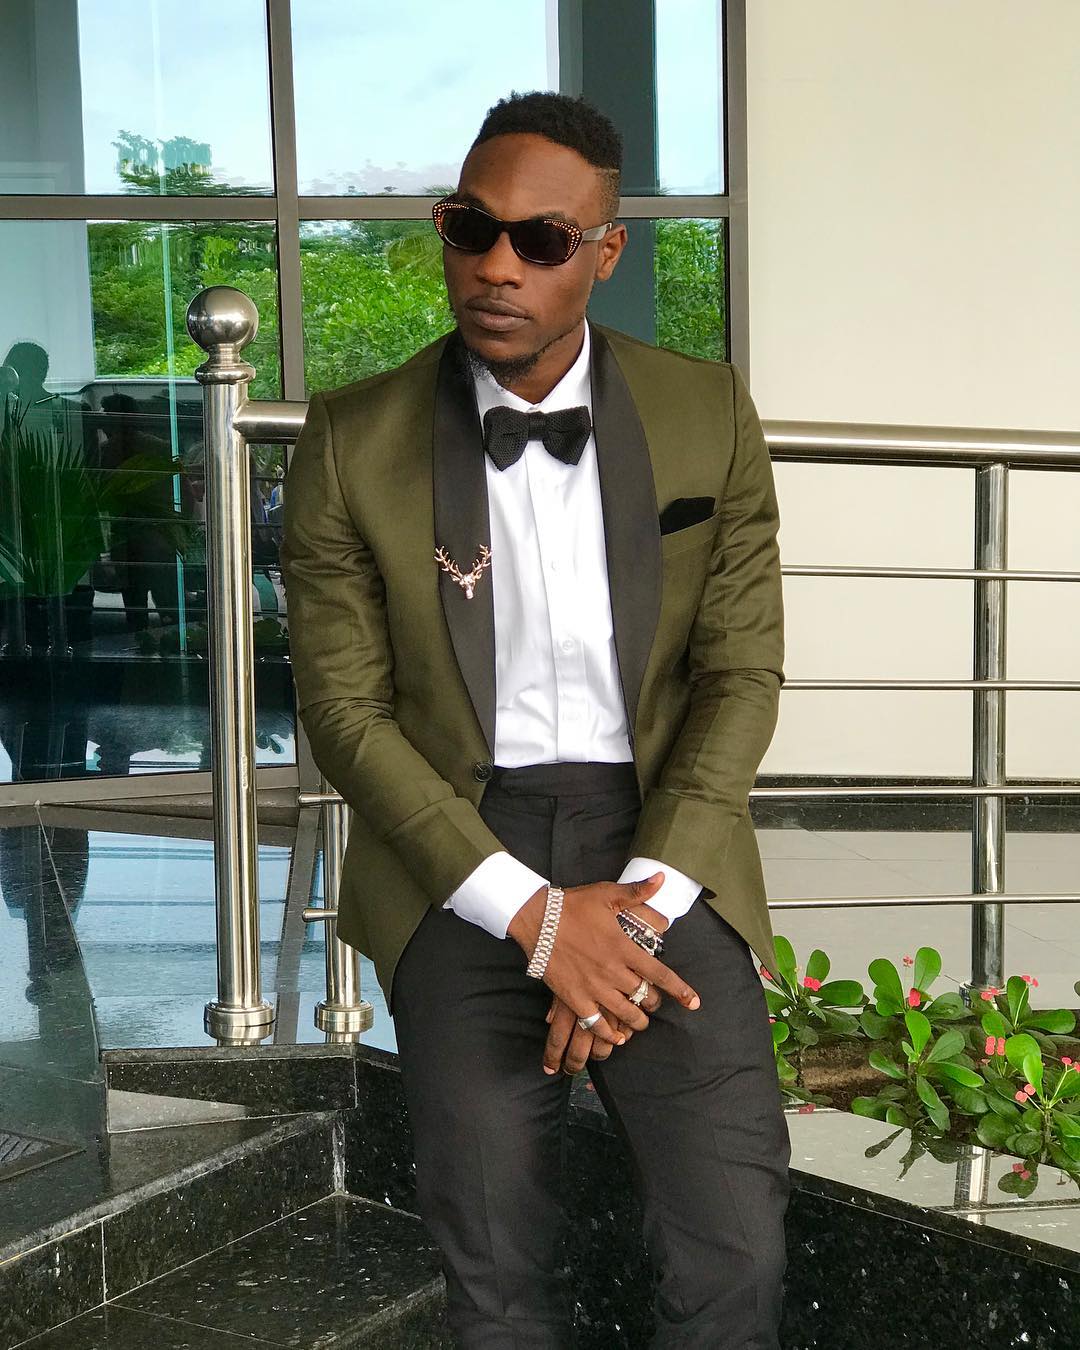 Singer LAX tells Nigerians to mind their business, after he acquired a ...